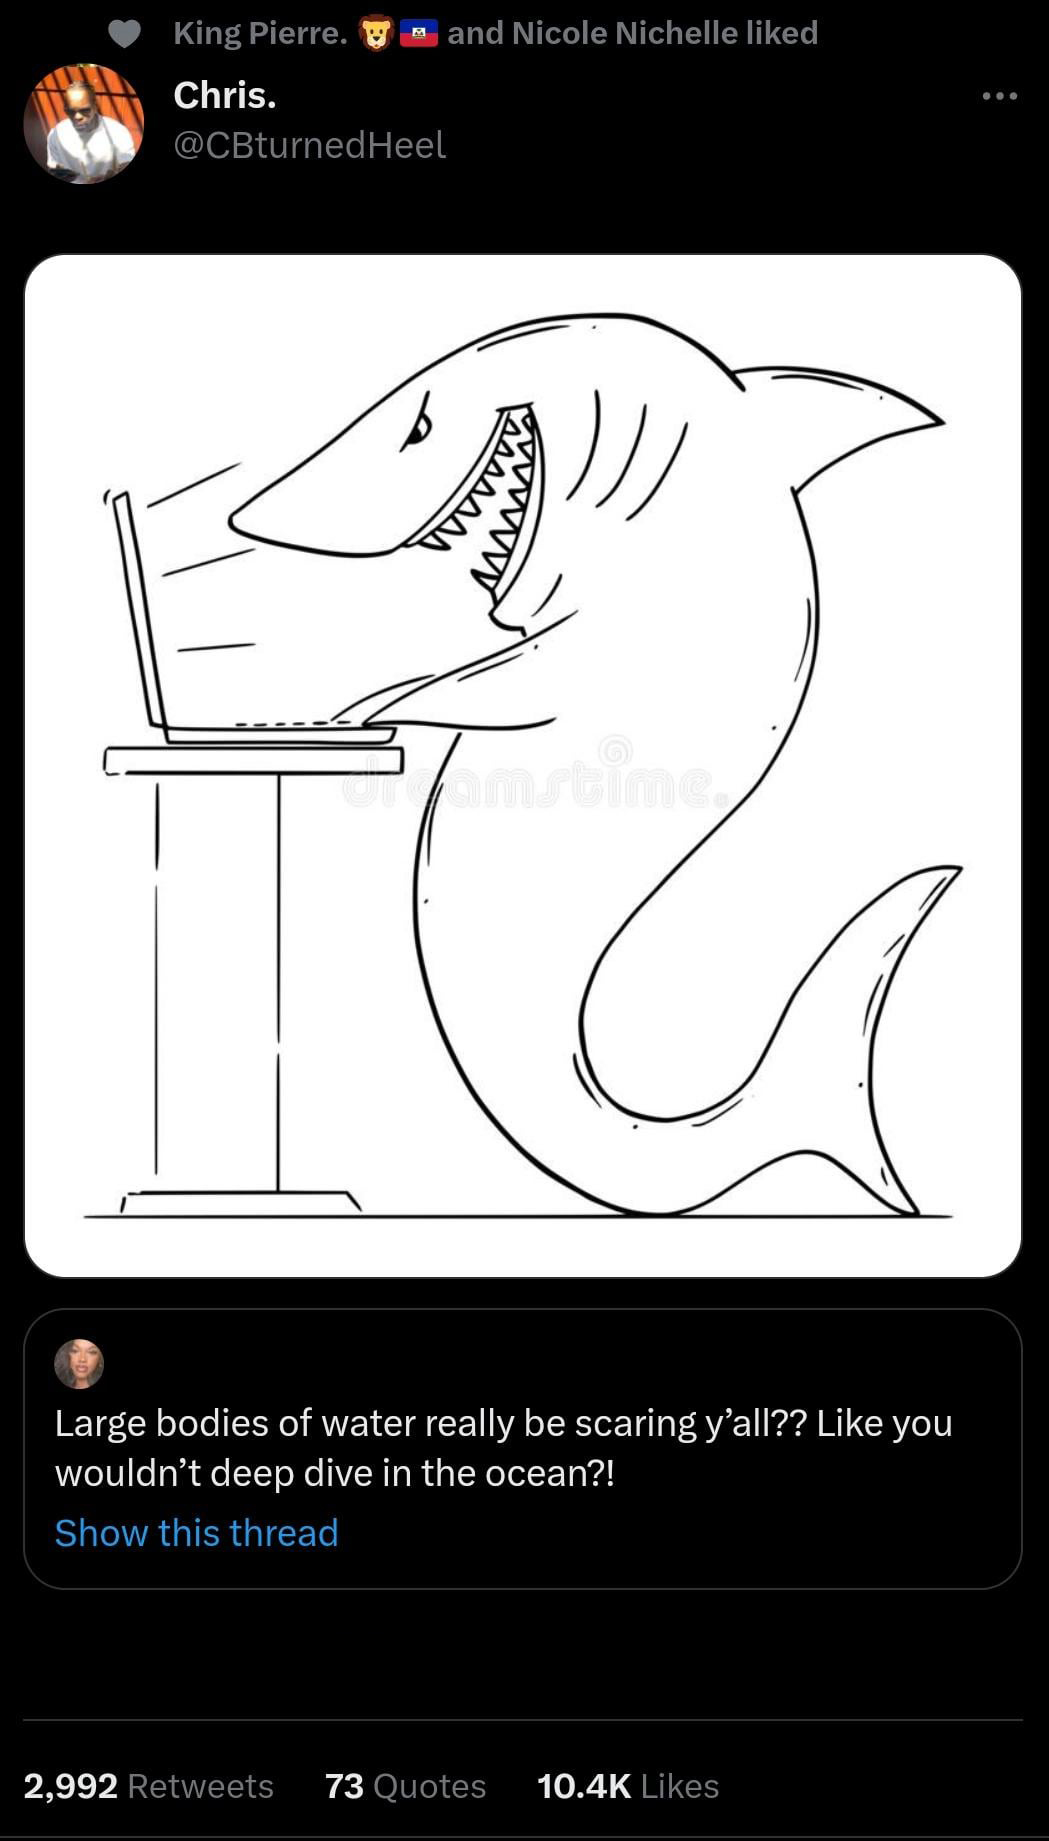 funny tweets and memes - cartoon - King Pierre. Chris. Heel and Nicole Nichelle d www Samstime Large bodies of water really be scaring y'all?? you wouldn't deep dive in the ocean?! Show this thread 2,992 73 Quotes ...